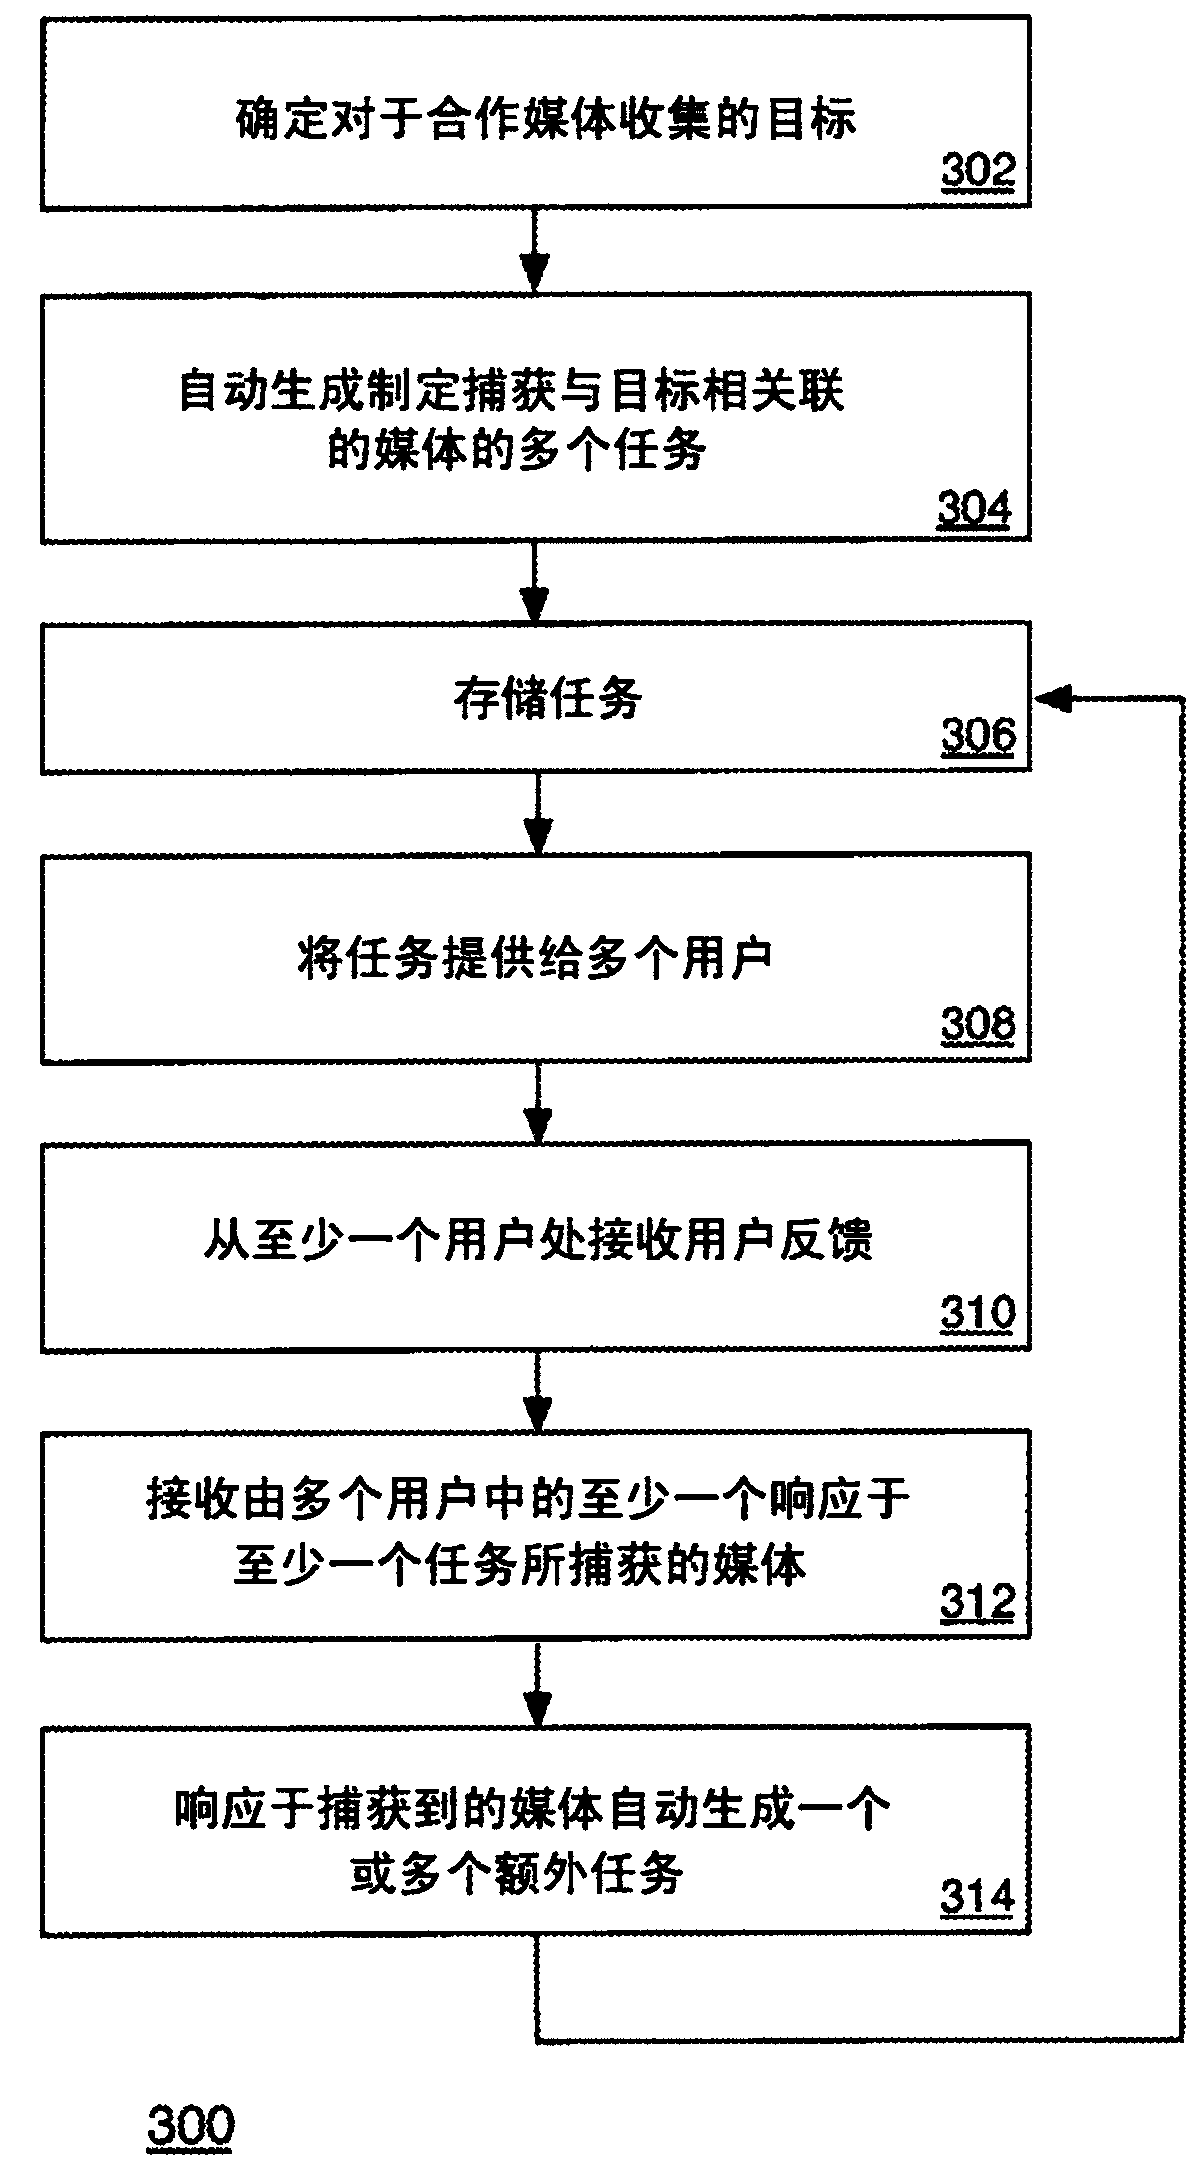 Collaborative media collection system and method